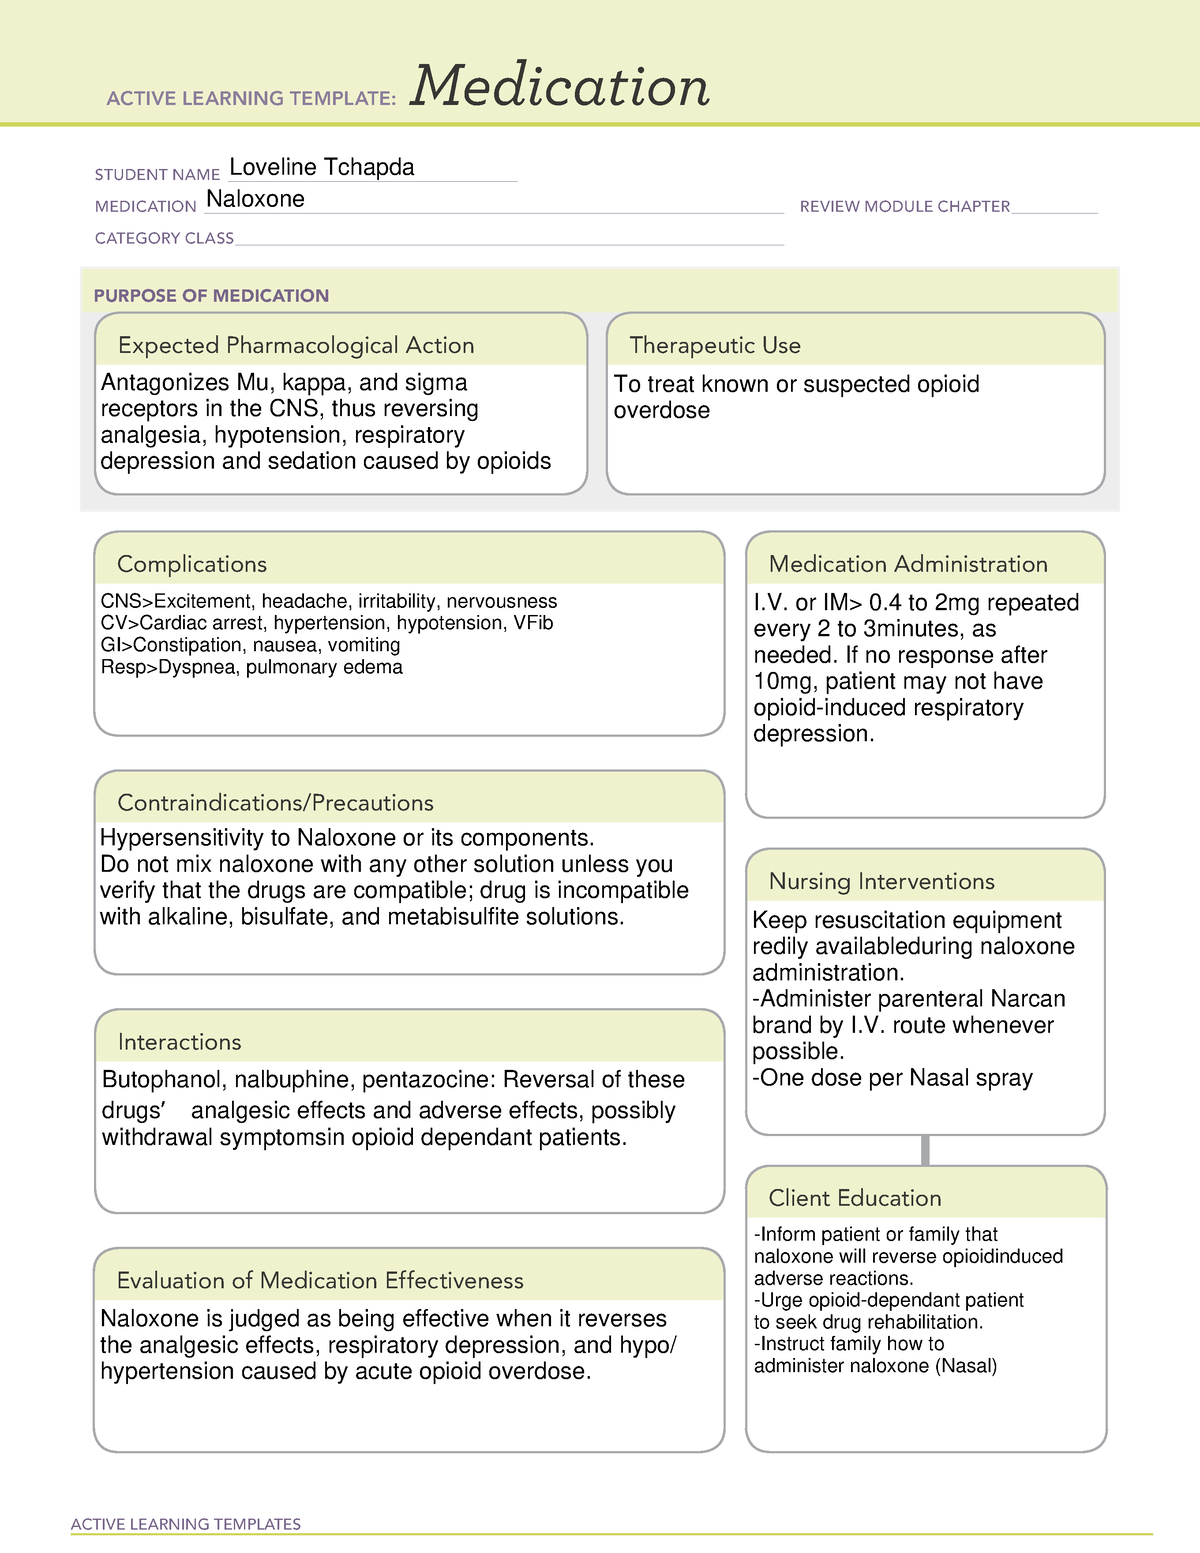 ATI Template Medication for Naloxone ACTIVE LEARNING TEMPLATES